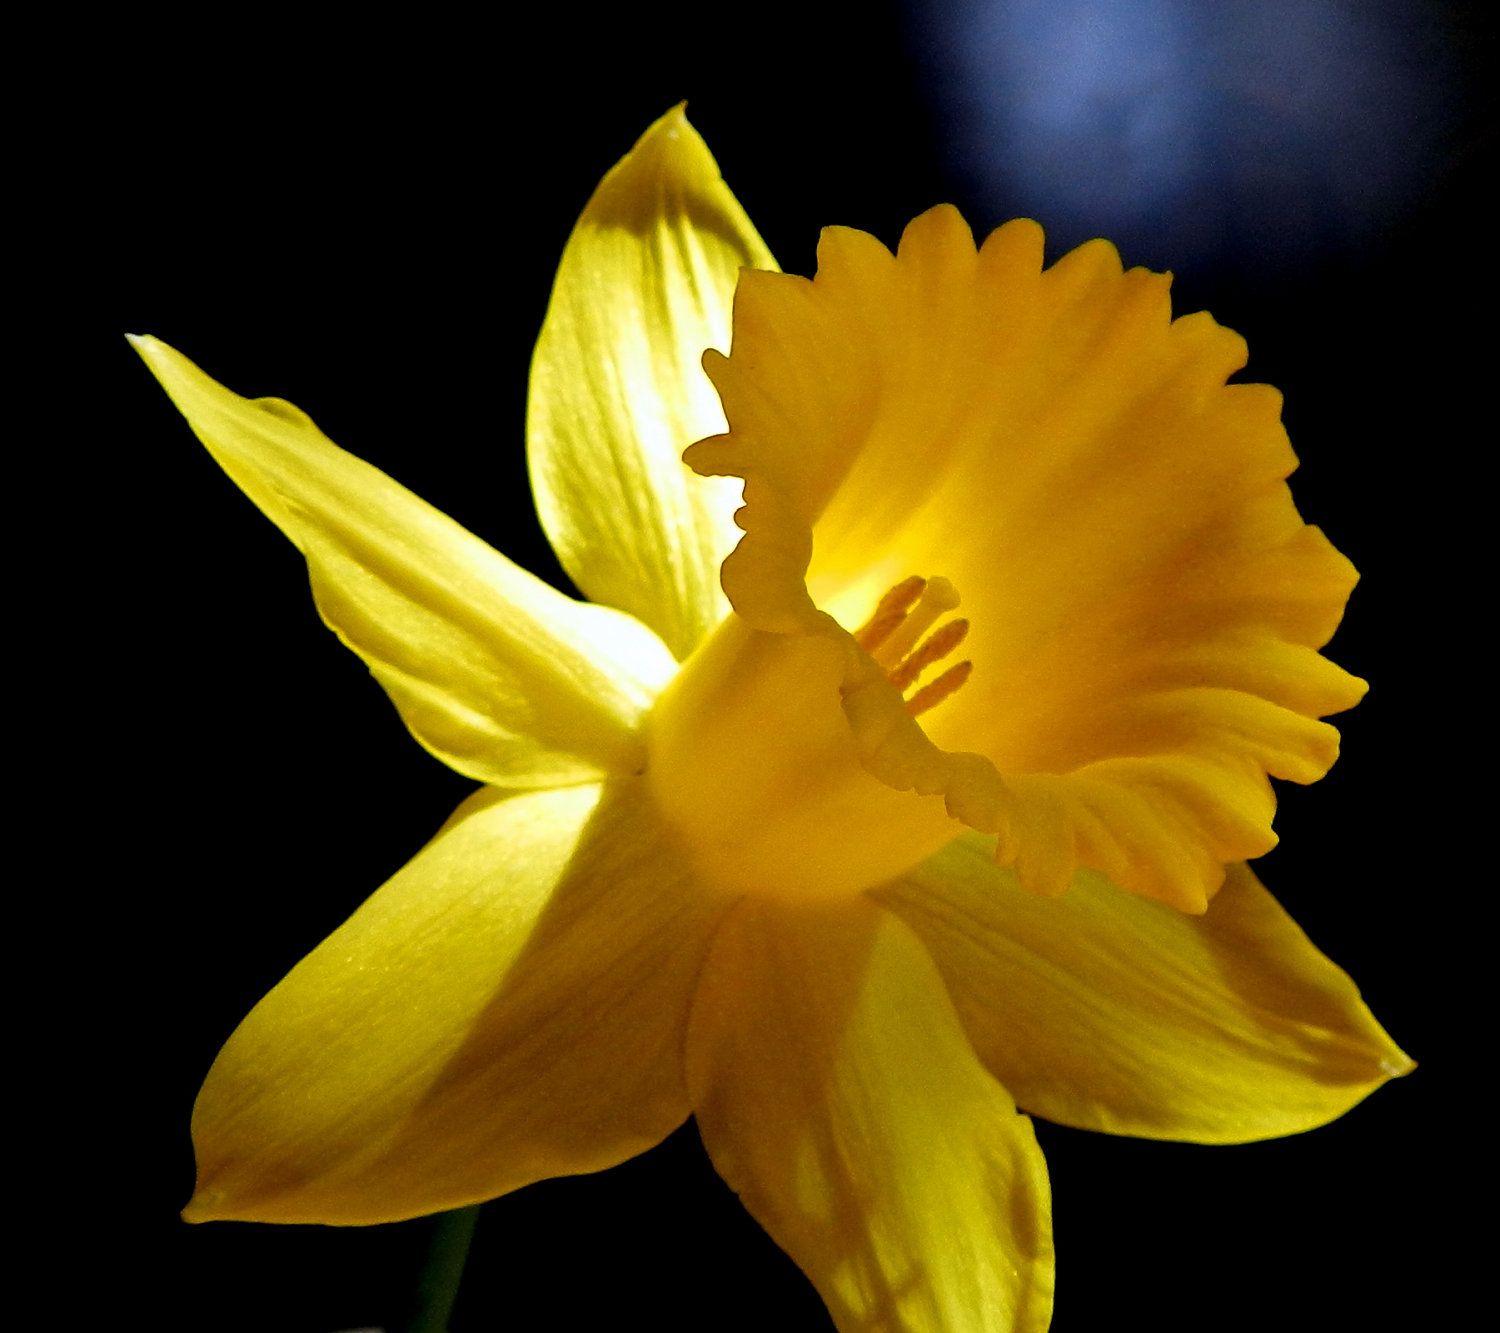 Cup of Gold Daffodil / macro photography by Breath Of An Angel on ...